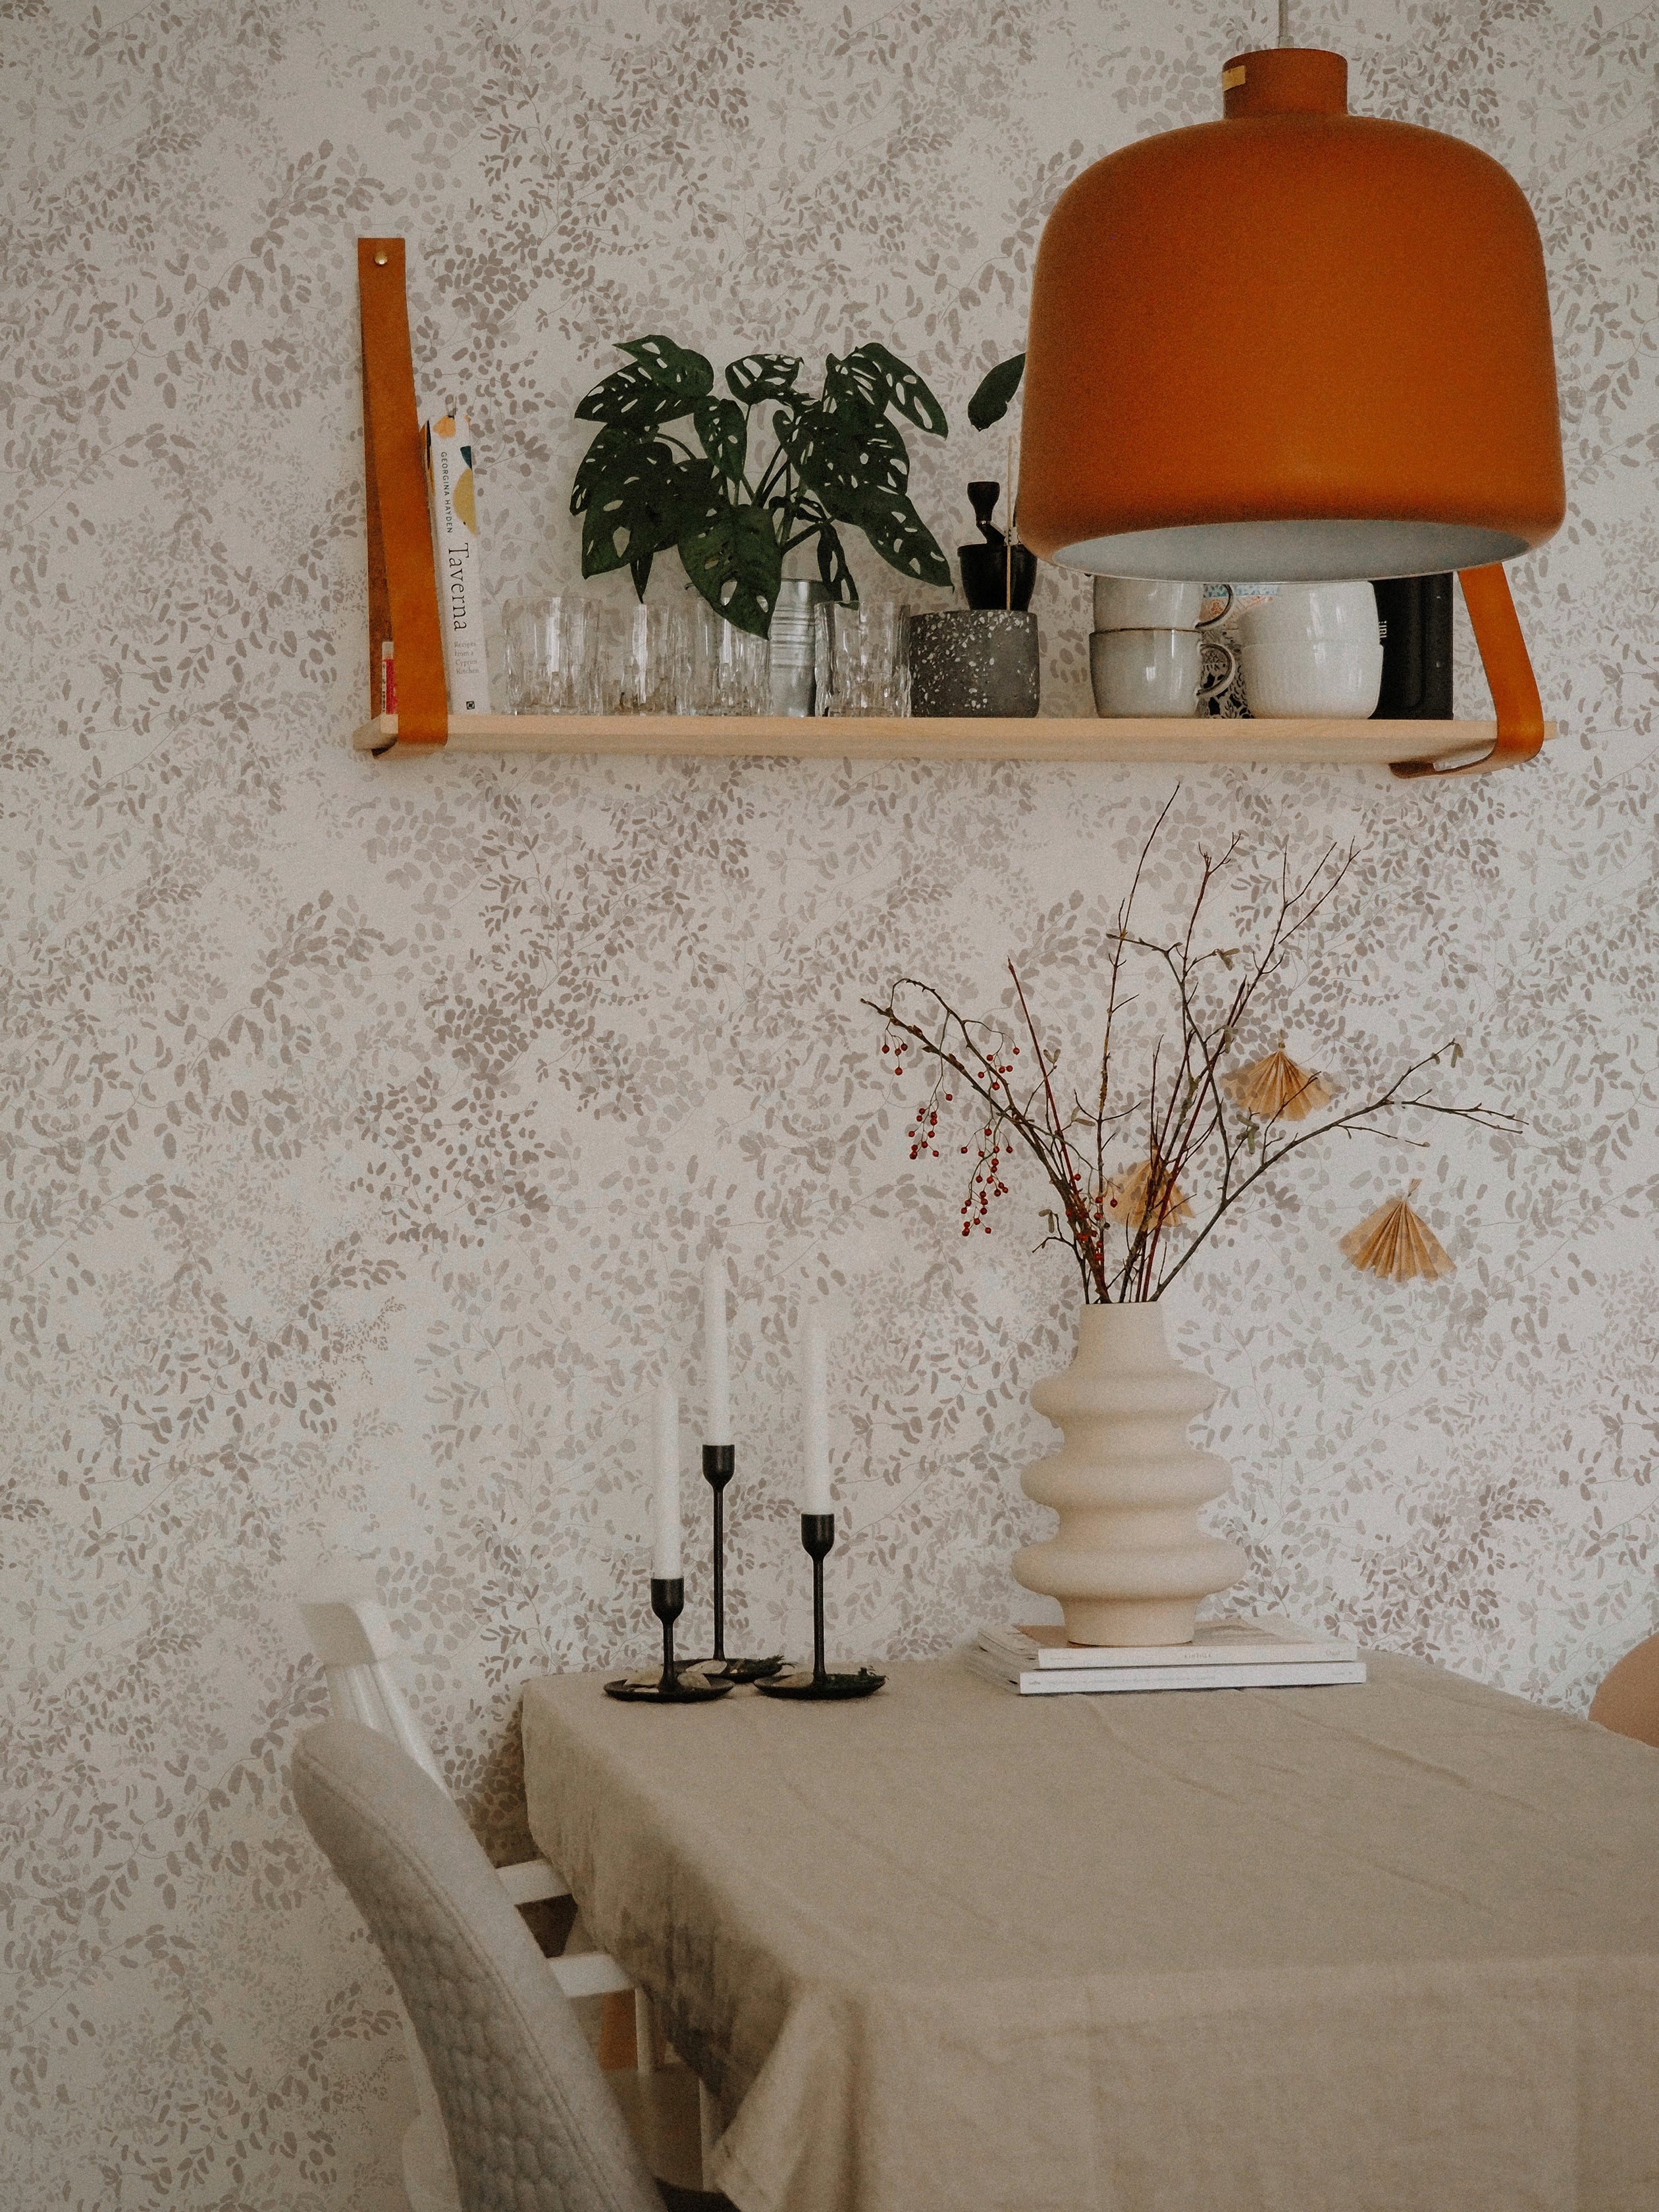 A cozy dining room scene with walls adorned in the Golden Delicate Winter Floral wallpaper, complementing the earth-toned furnishings and decor, including a beige tablecloth, wooden shelf with plants, and a vibrant orange lampshade.